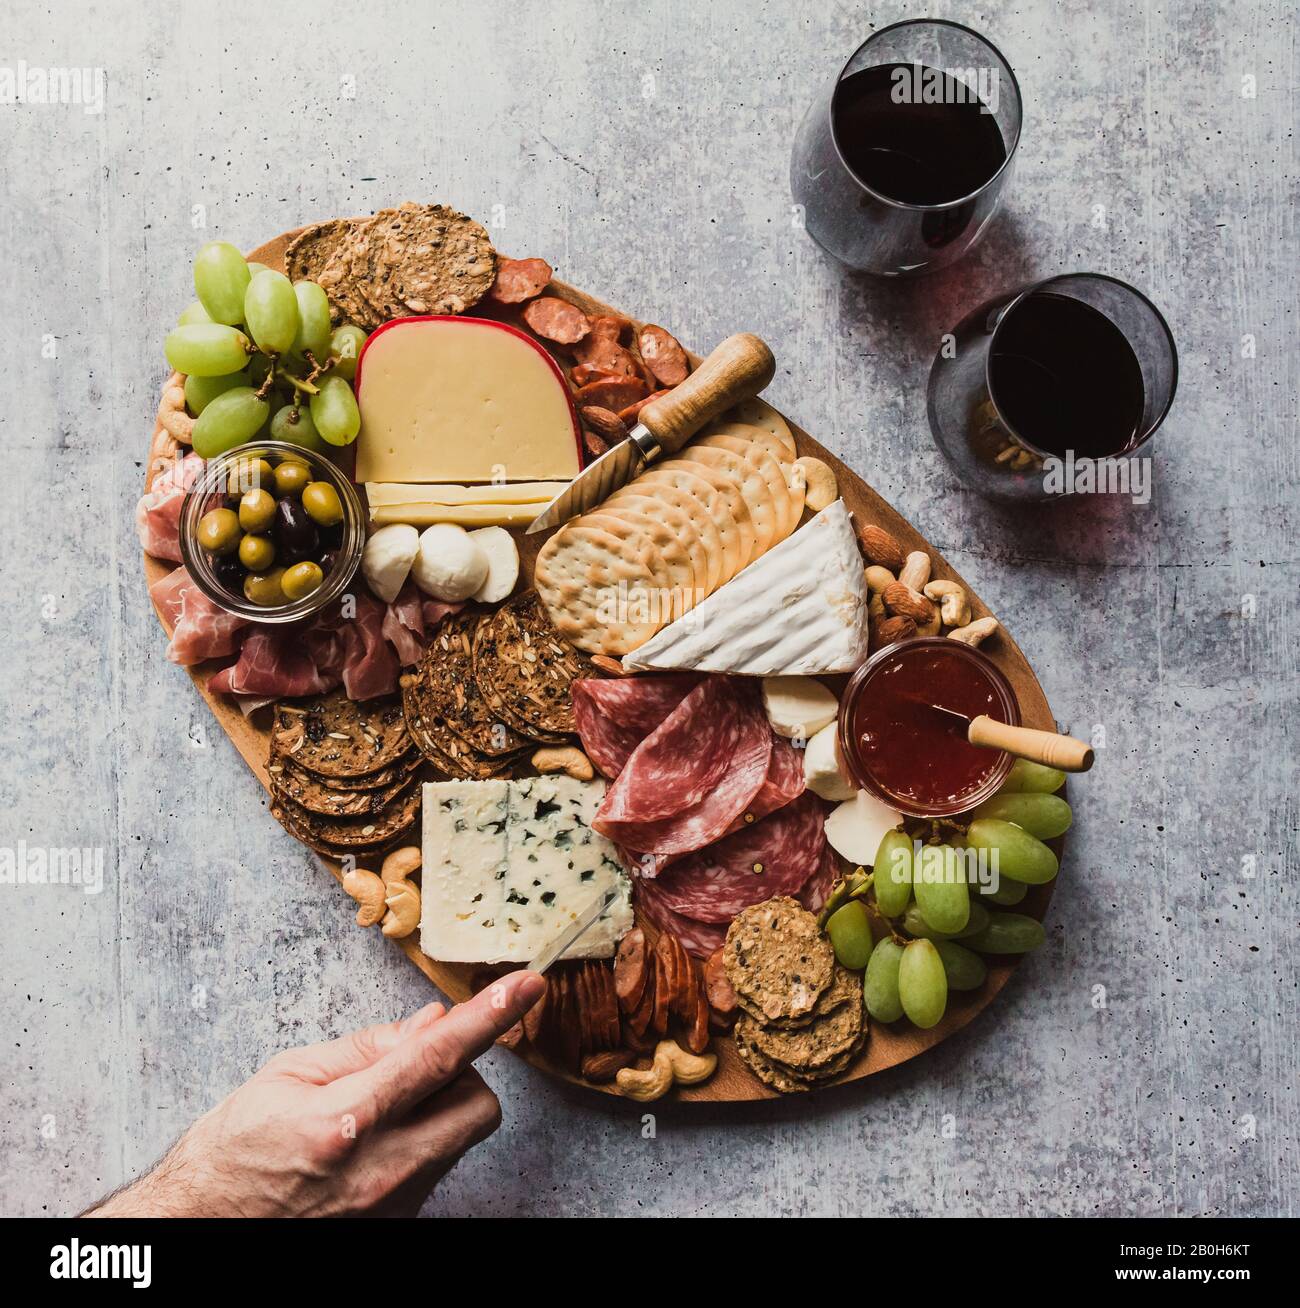 Top view of hand cutting cheese on charcuterie board on stone counter. Stock Photo